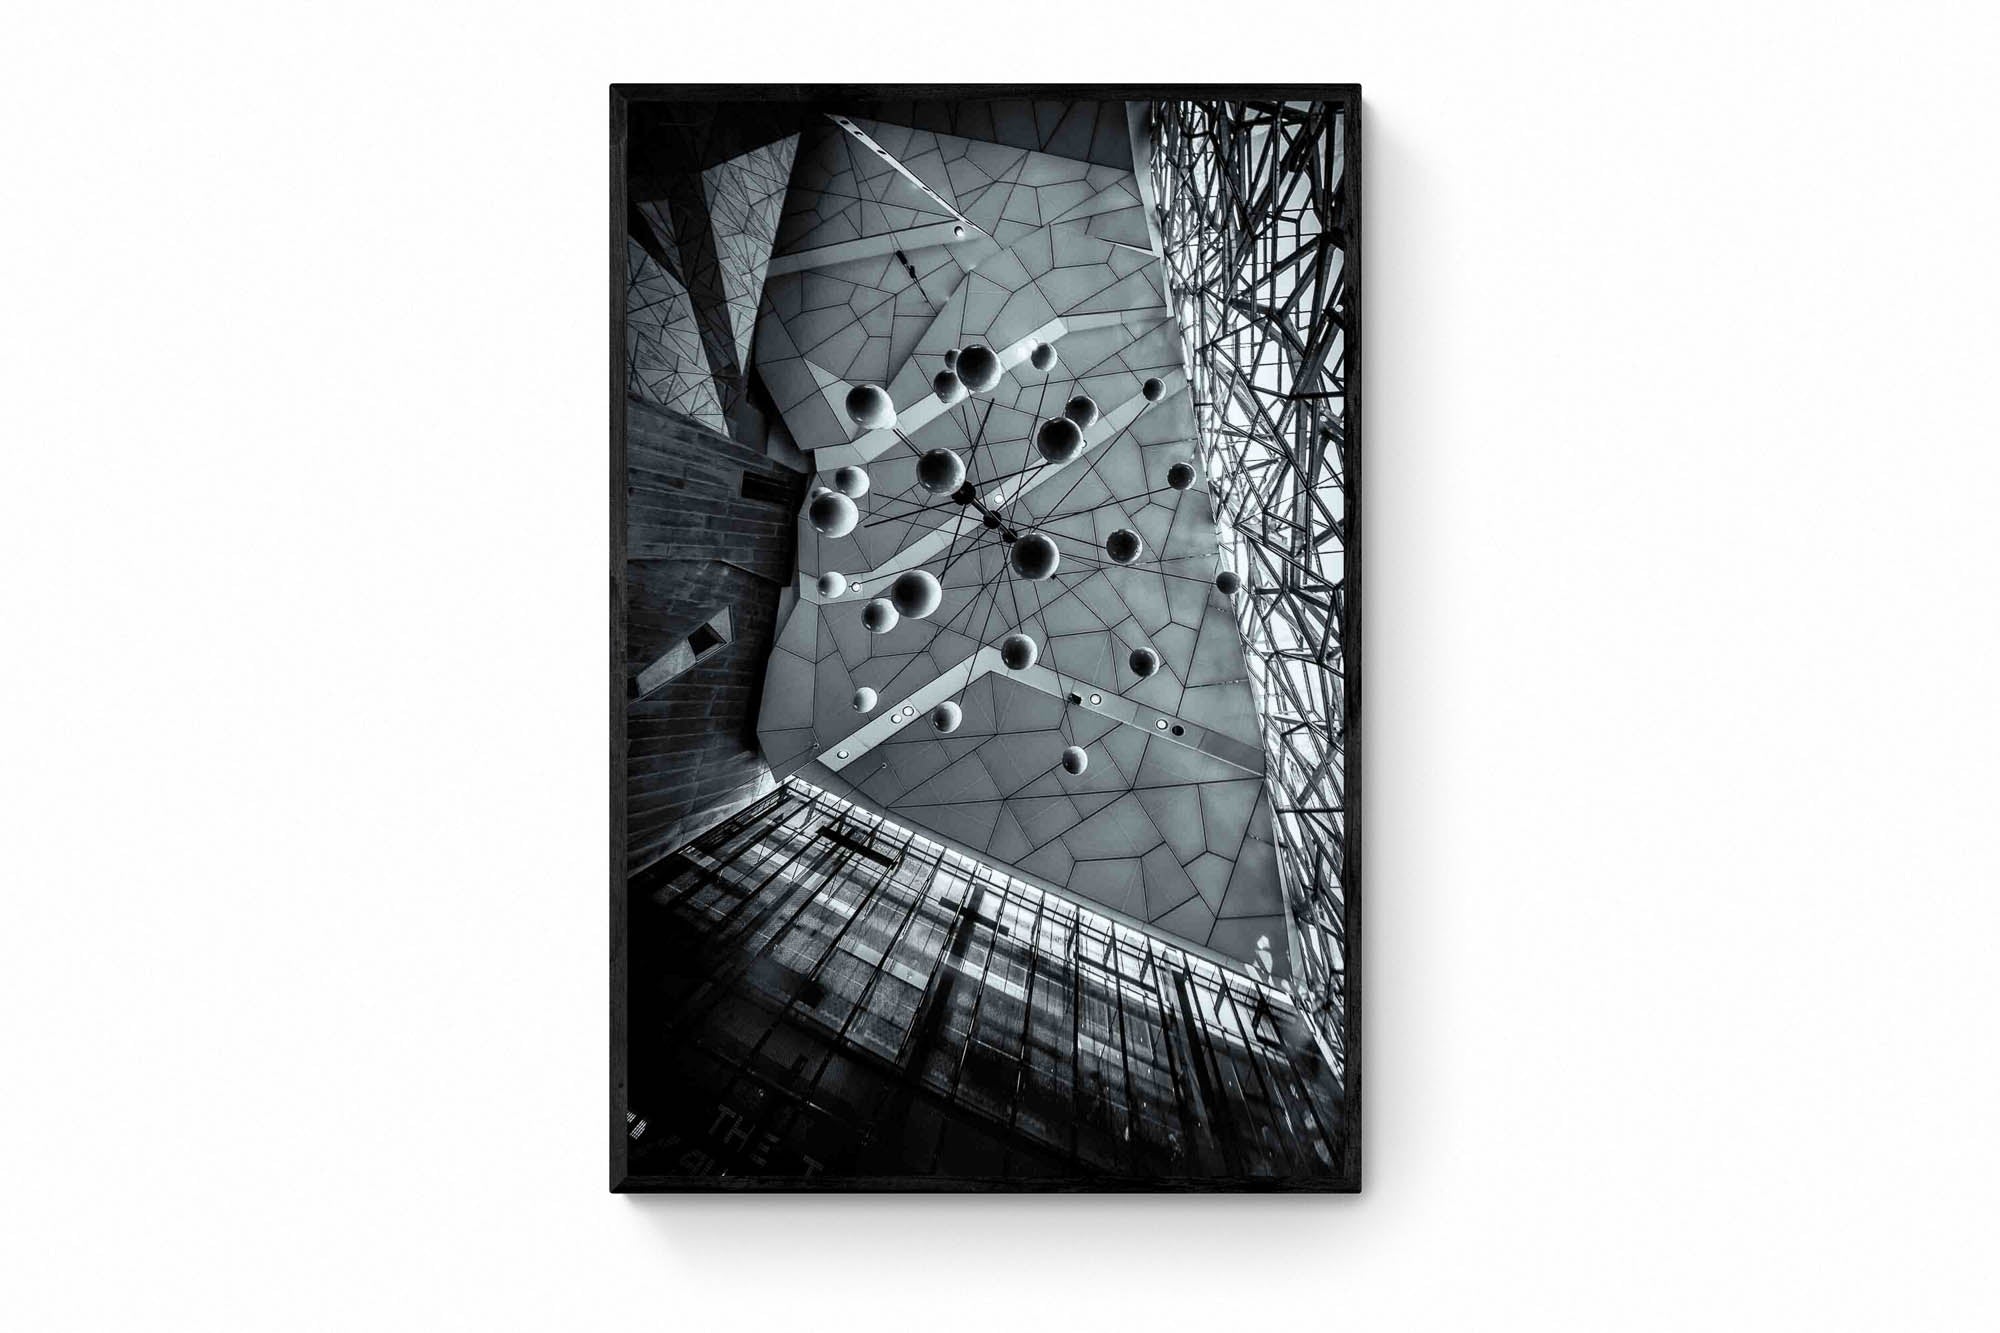 Black and white photo of the abstract geometric ceiling at Federation Square in Melbourne, with spherical elements hanging against the angular design.